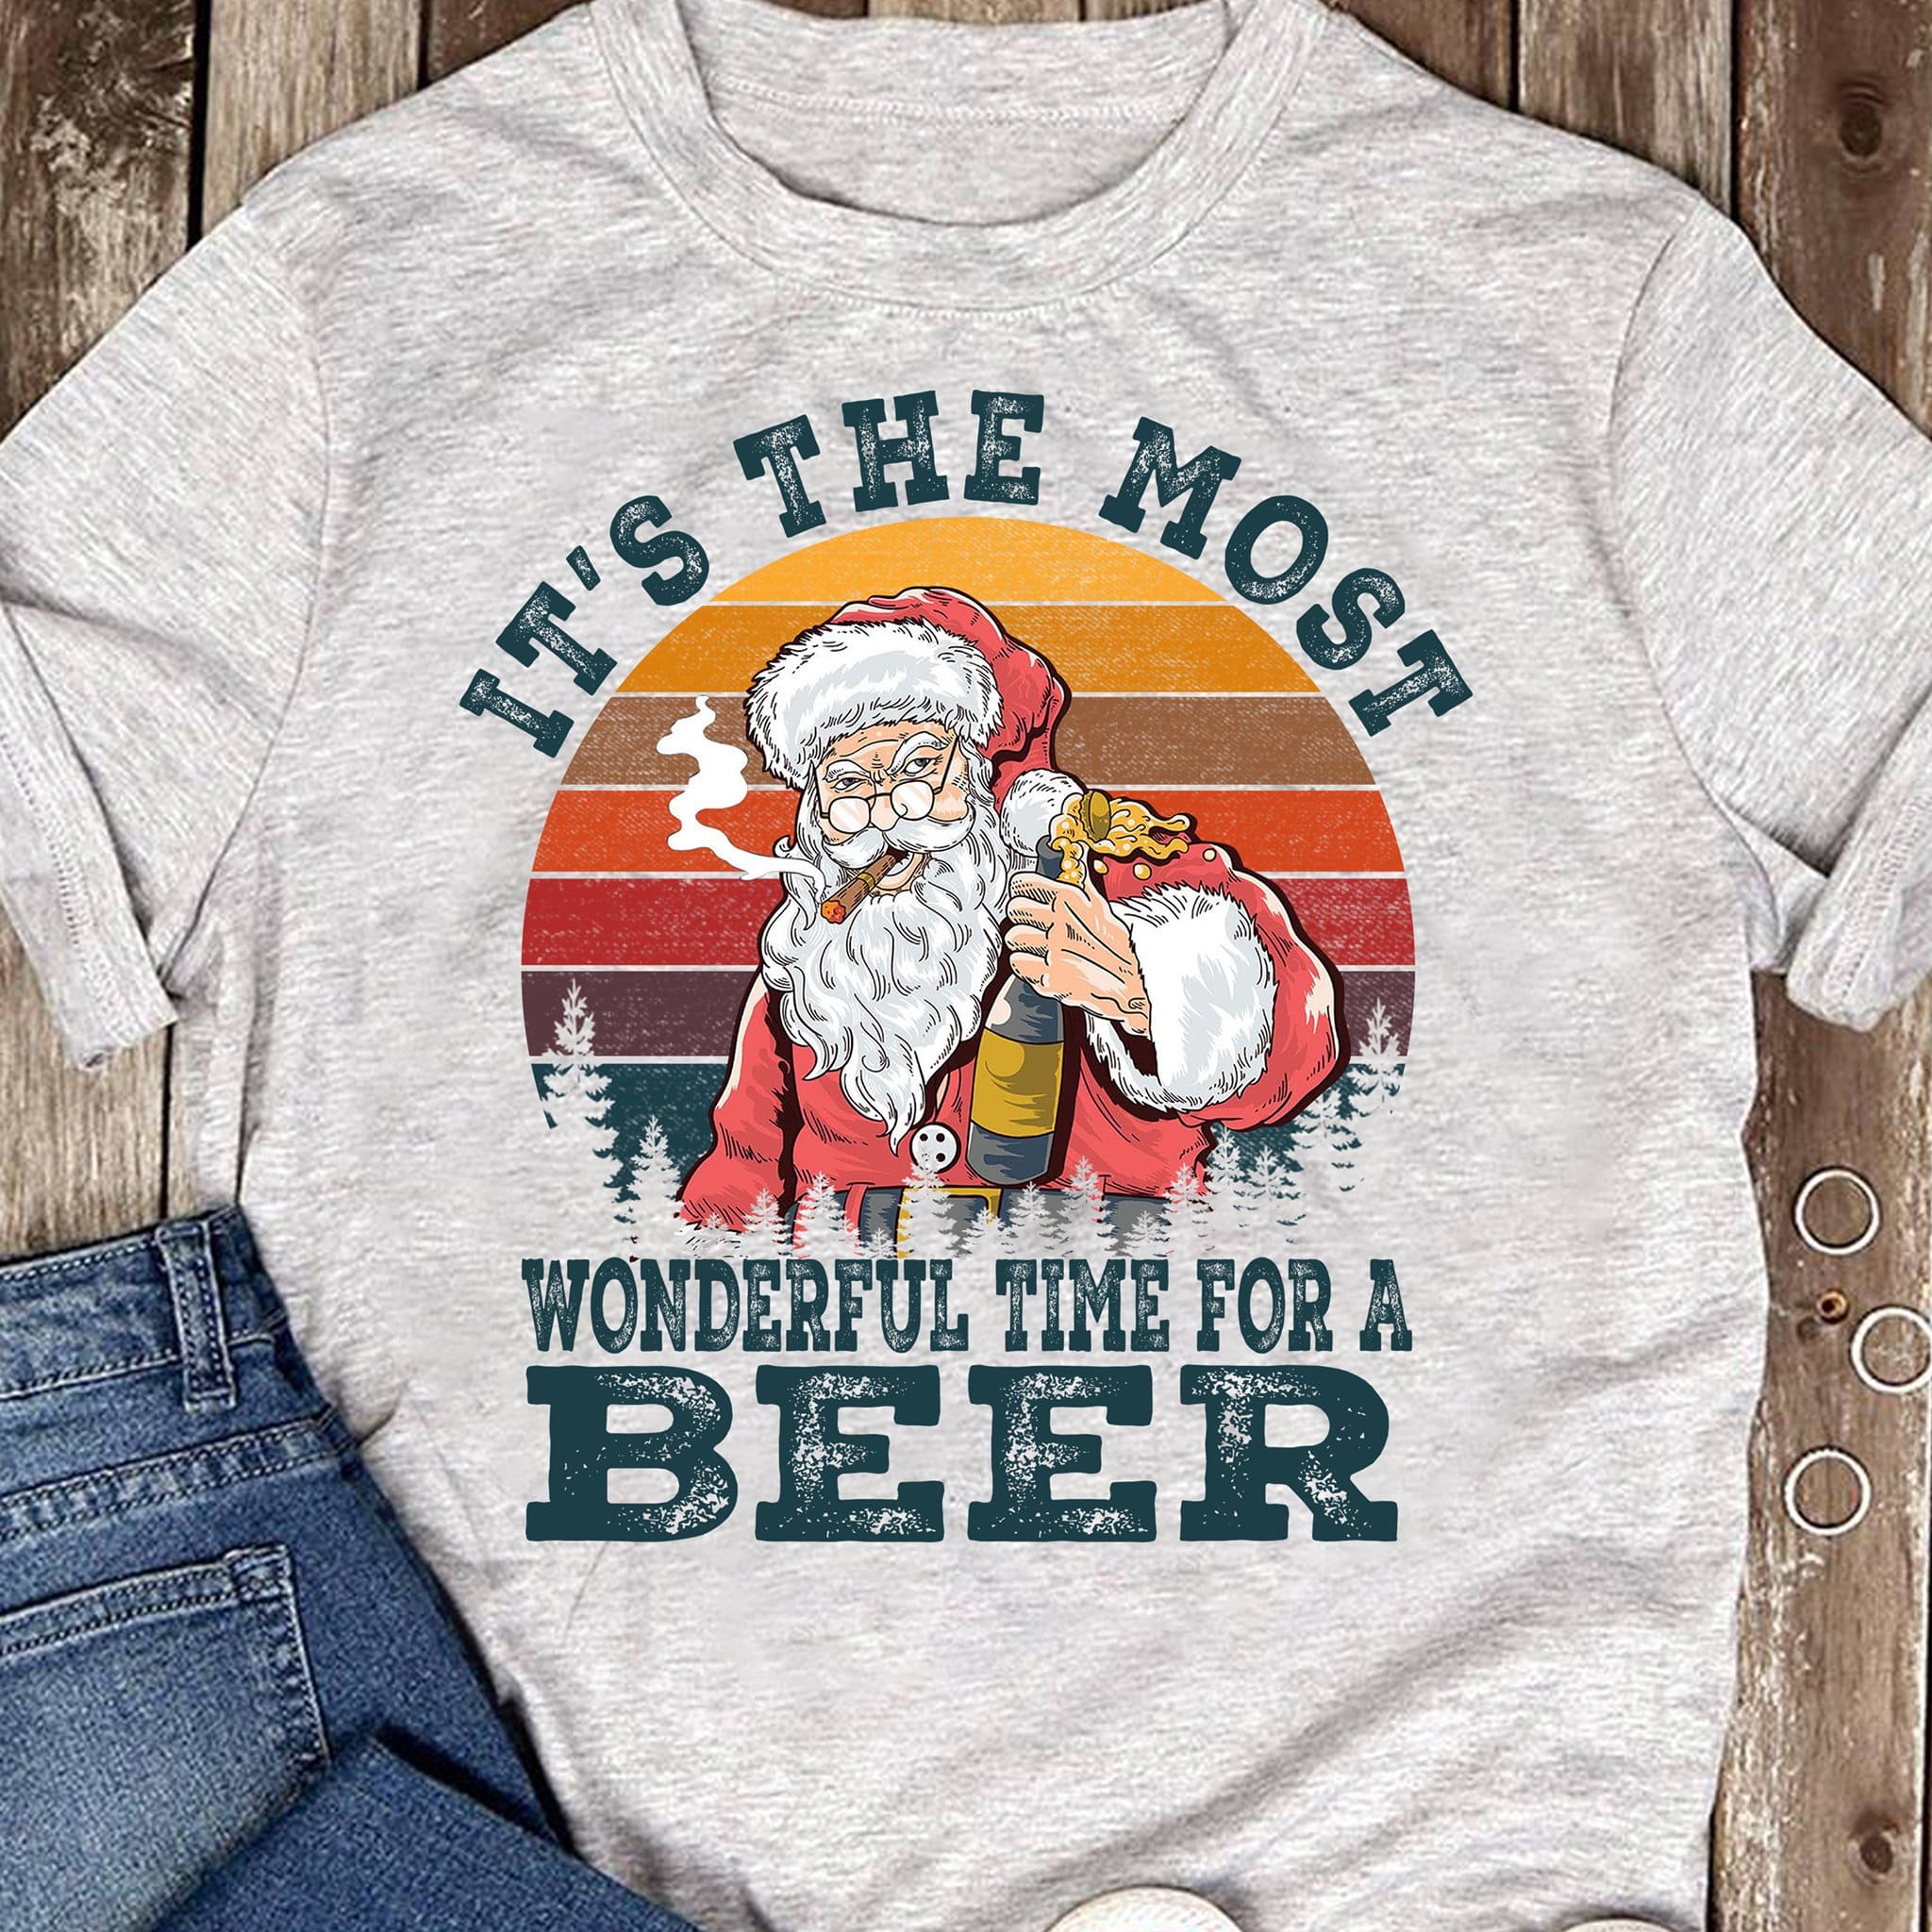 It's the most wonderful time for a beer - Christmas day ugly sweater, Santa Claus drinking beer